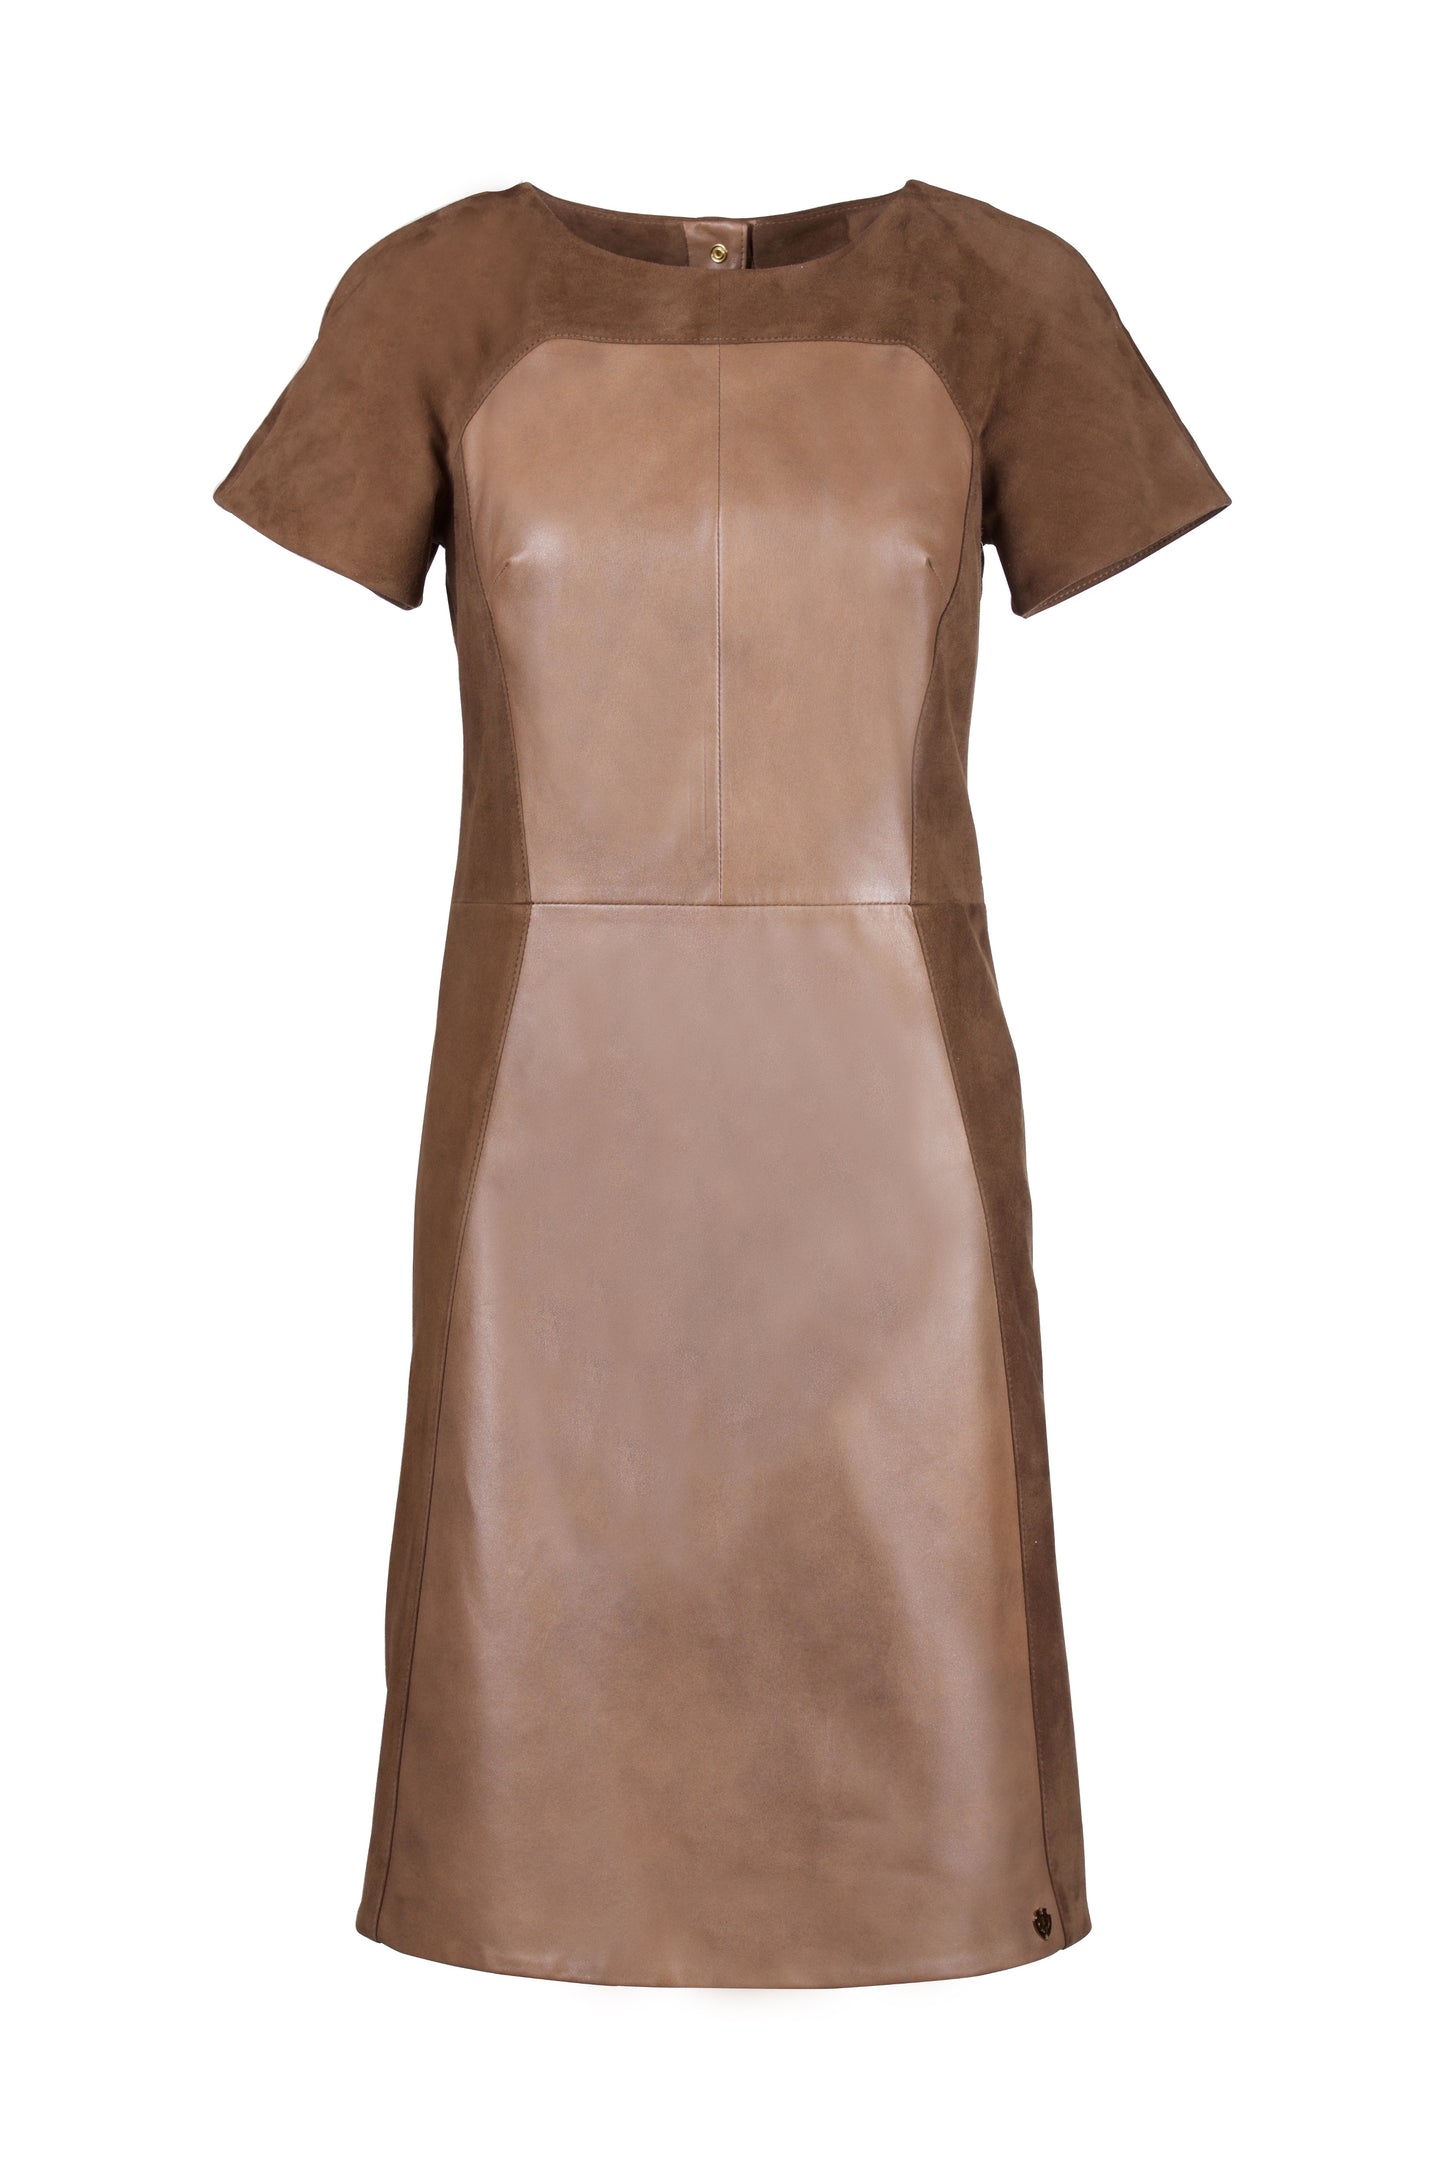 Suede  Reindeer Leather Dress- Limited Edition